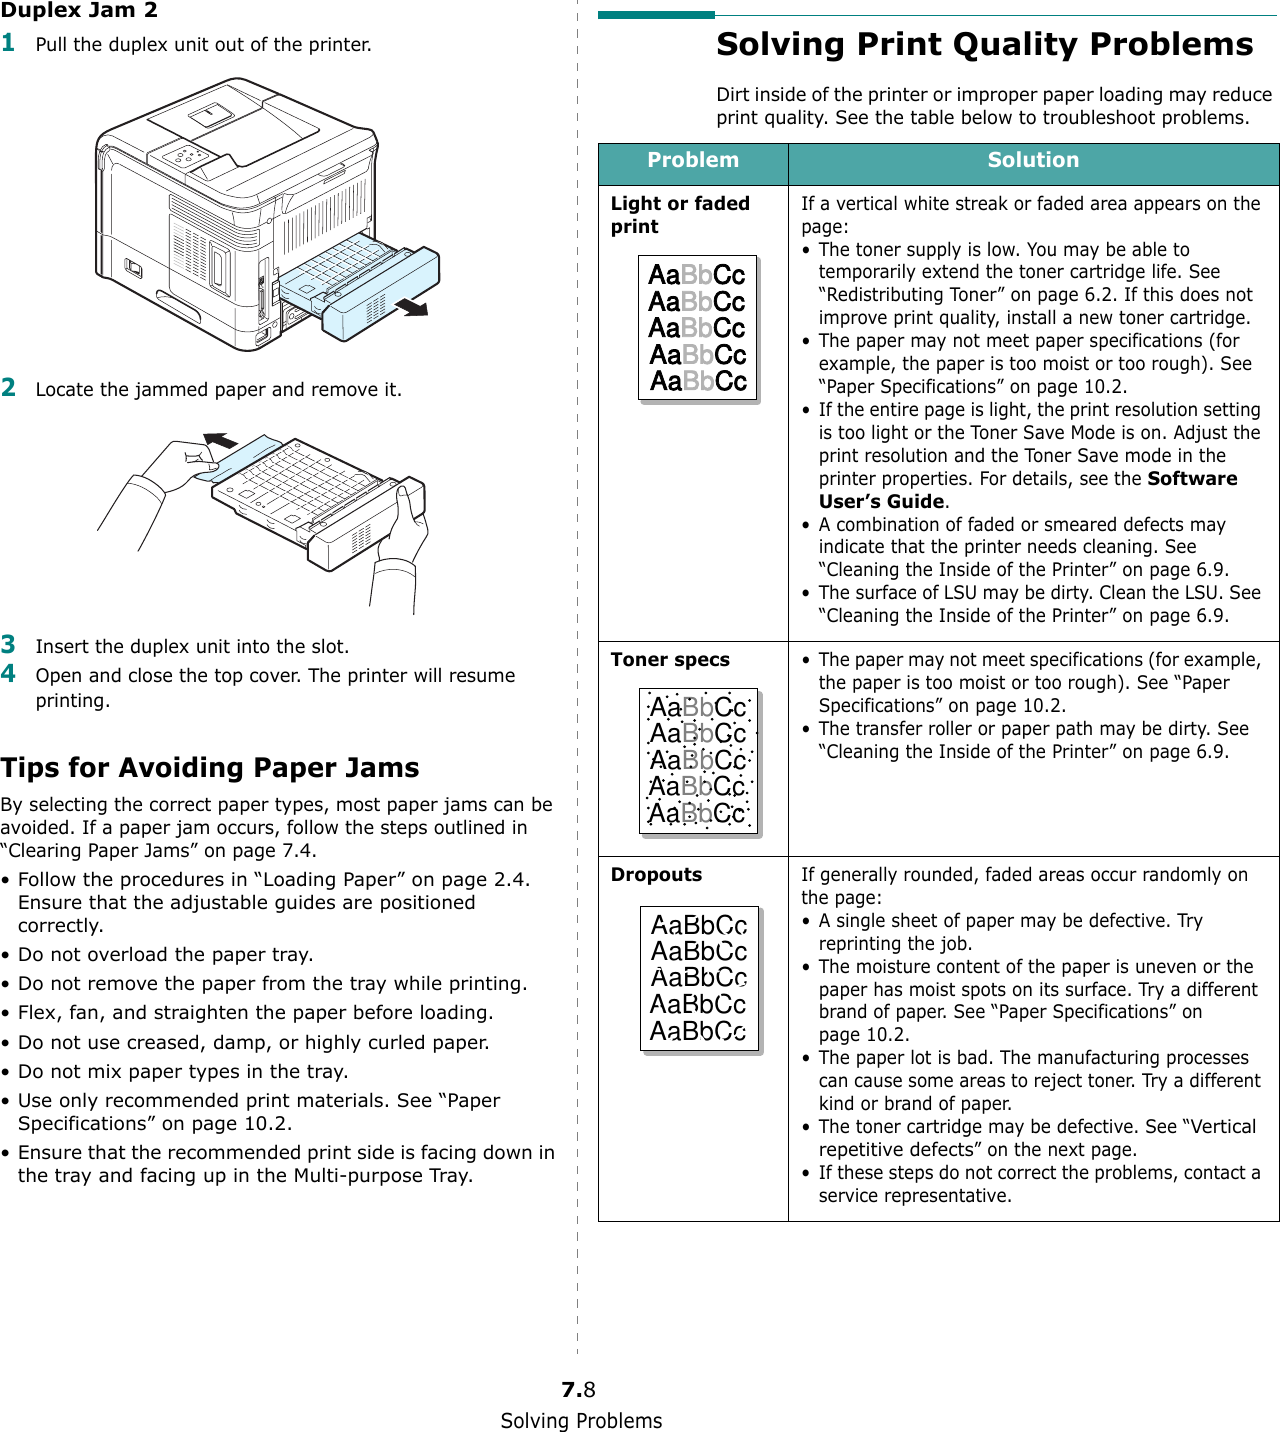 Solving Problems7.8Duplex Jam 21Pull the duplex unit out of the printer.2Locate the jammed paper and remove it.3Insert the duplex unit into the slot.4Open and close the top cover. The printer will resume printing. Tips for Avoiding Paper JamsBy selecting the correct paper types, most paper jams can be avoided. If a paper jam occurs, follow the steps outlined in “Clearing Paper Jams” on page 7.4. • Follow the procedures in “Loading Paper” on page 2.4. Ensure that the adjustable guides are positioned correctly.• Do not overload the paper tray.• Do not remove the paper from the tray while printing.• Flex, fan, and straighten the paper before loading. • Do not use creased, damp, or highly curled paper.• Do not mix paper types in the tray.• Use only recommended print materials. See “Paper Specifications” on page 10.2.• Ensure that the recommended print side is facing down in the tray and facing up in the Multi-purpose Tray.Solving Print Quality ProblemsDirt inside of the printer or improper paper loading may reduce print quality. See the table below to troubleshoot problems. Problem SolutionLight or faded printIf a vertical white streak or faded area appears on the page:• The toner supply is low. You may be able to temporarily extend the toner cartridge life. See “Redistributing Toner” on page 6.2. If this does not improve print quality, install a new toner cartridge.• The paper may not meet paper specifications (for example, the paper is too moist or too rough). See “Paper Specifications” on page 10.2.• If the entire page is light, the print resolution setting is too light or the Toner Save Mode is on. Adjust the print resolution and the Toner Save mode in the printer properties. For details, see the Software User’s Guide.• A combination of faded or smeared defects may indicate that the printer needs cleaning. See “Cleaning the Inside of the Printer” on page 6.9.• The surface of LSU may be dirty. Clean the LSU. See “Cleaning the Inside of the Printer” on page 6.9.Toner specs• The paper may not meet specifications (for example, the paper is too moist or too rough). See “Paper Specifications” on page 10.2.• The transfer roller or paper path may be dirty. See “Cleaning the Inside of the Printer” on page 6.9.DropoutsIf generally rounded, faded areas occur randomly on the page:• A single sheet of paper may be defective. Try reprinting the job.• The moisture content of the paper is uneven or the paper has moist spots on its surface. Try a different brand of paper. See “Paper Specifications” on page 10.2.• The paper lot is bad. The manufacturing processes can cause some areas to reject toner. Try a different kind or brand of paper.• The toner cartridge may be defective. See “Vertical repetitive defects” on the next page.• If these steps do not correct the problems, contact a service representative.AaBbCcAaBbCcAaBbCcAaBbCcAaBbCcAaBbCcAaBbCcAaBbCcAaBbCcAaBbCcAaBbCcAaBbCcAaBbCcAaBbCcAaBbCc